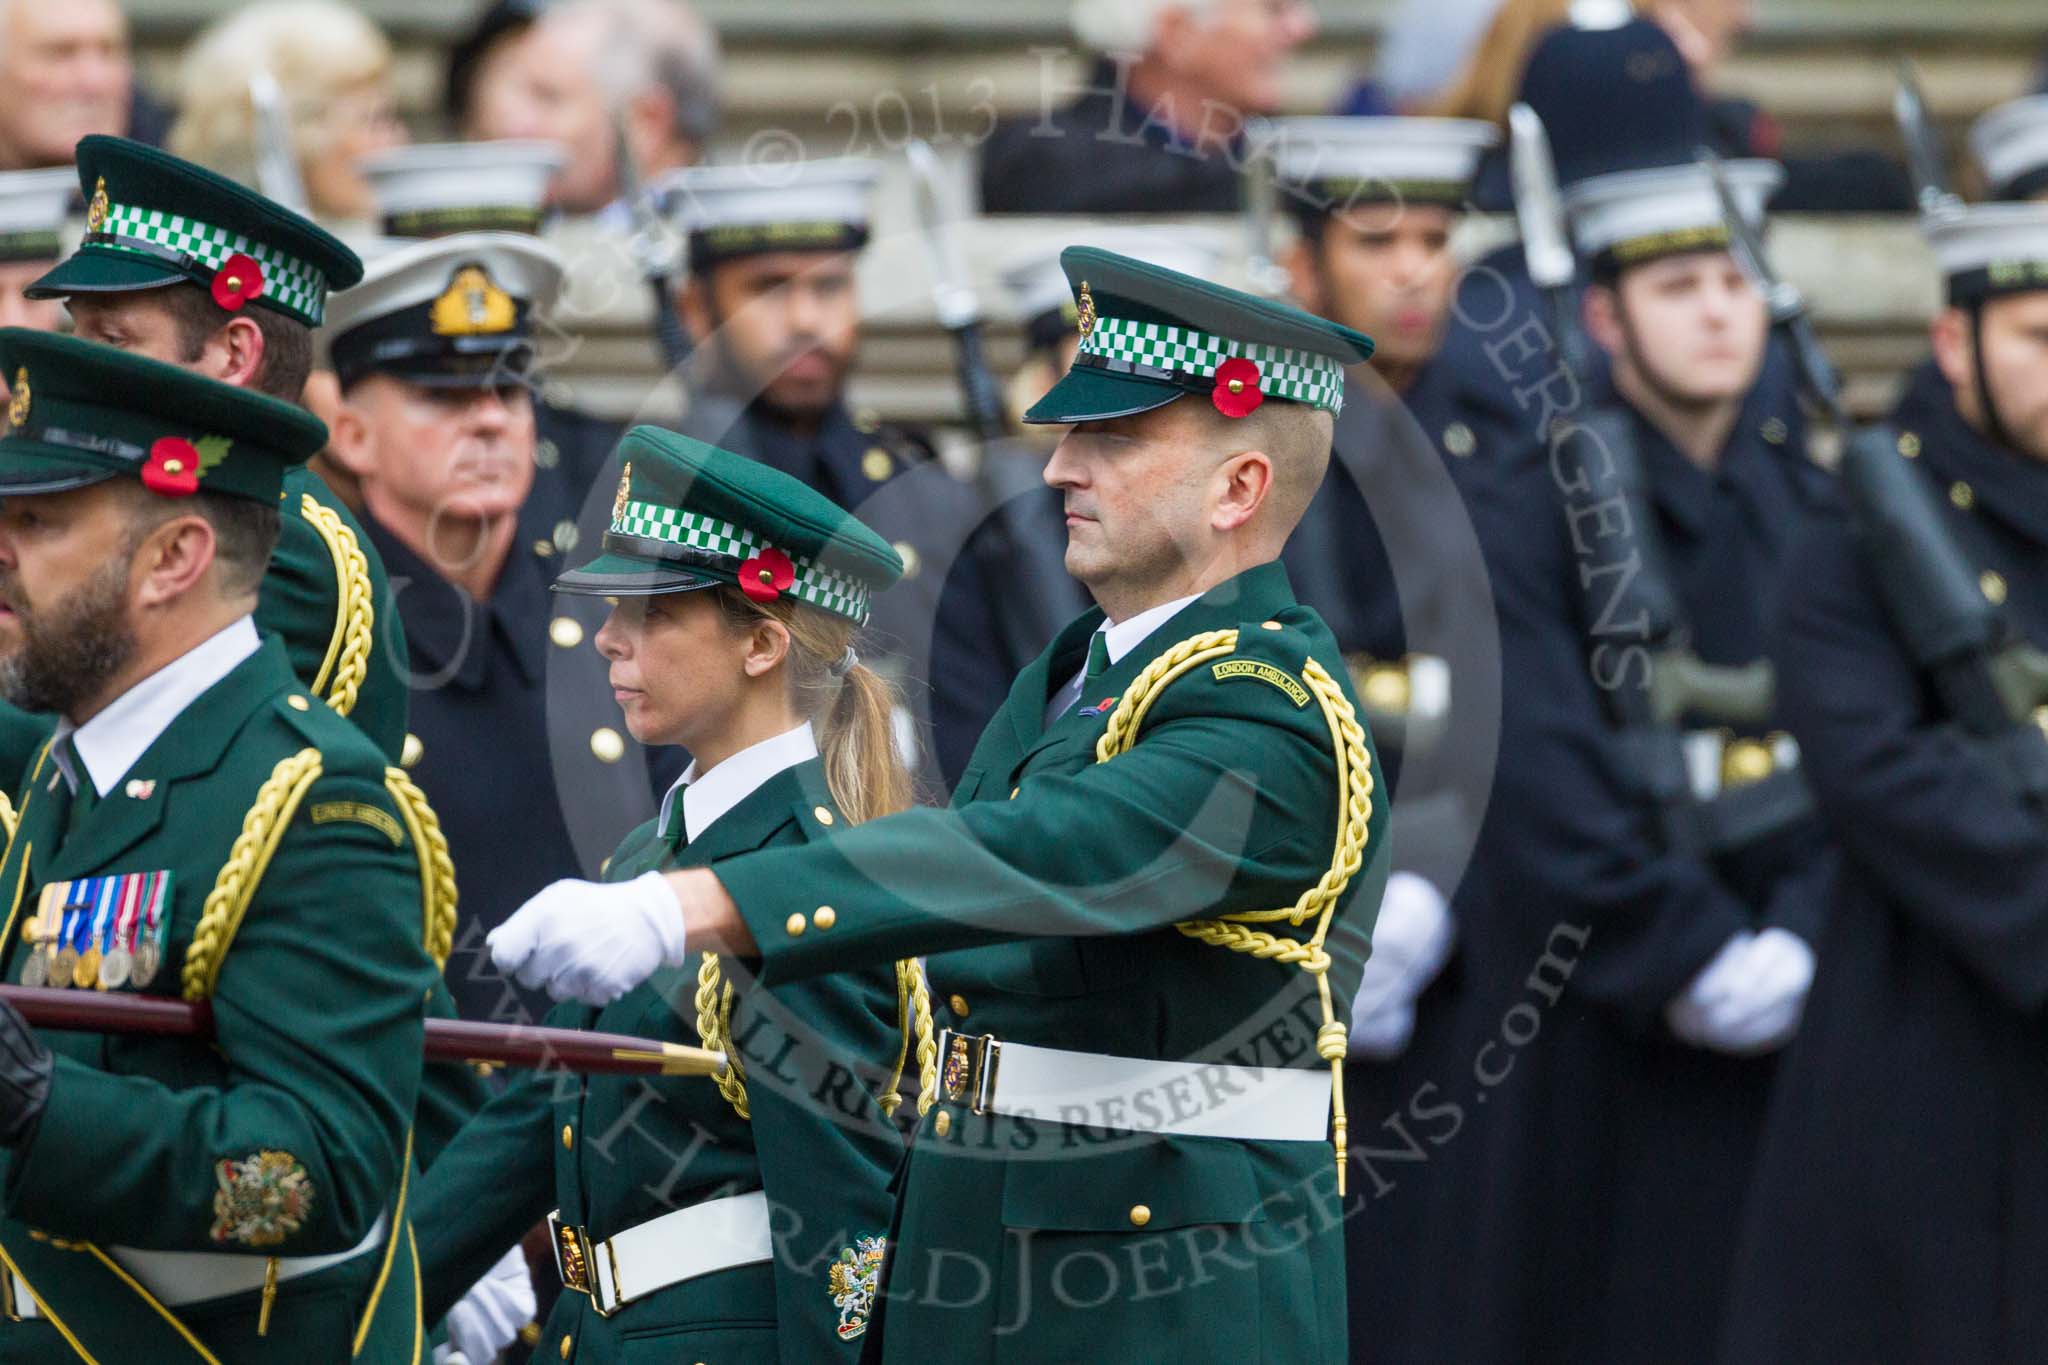 Remembrance Sunday at the Cenotaph 2015: Group M13, London Ambulance Service NHS Trust.
Cenotaph, Whitehall, London SW1,
London,
Greater London,
United Kingdom,
on 08 November 2015 at 12:16, image #1494